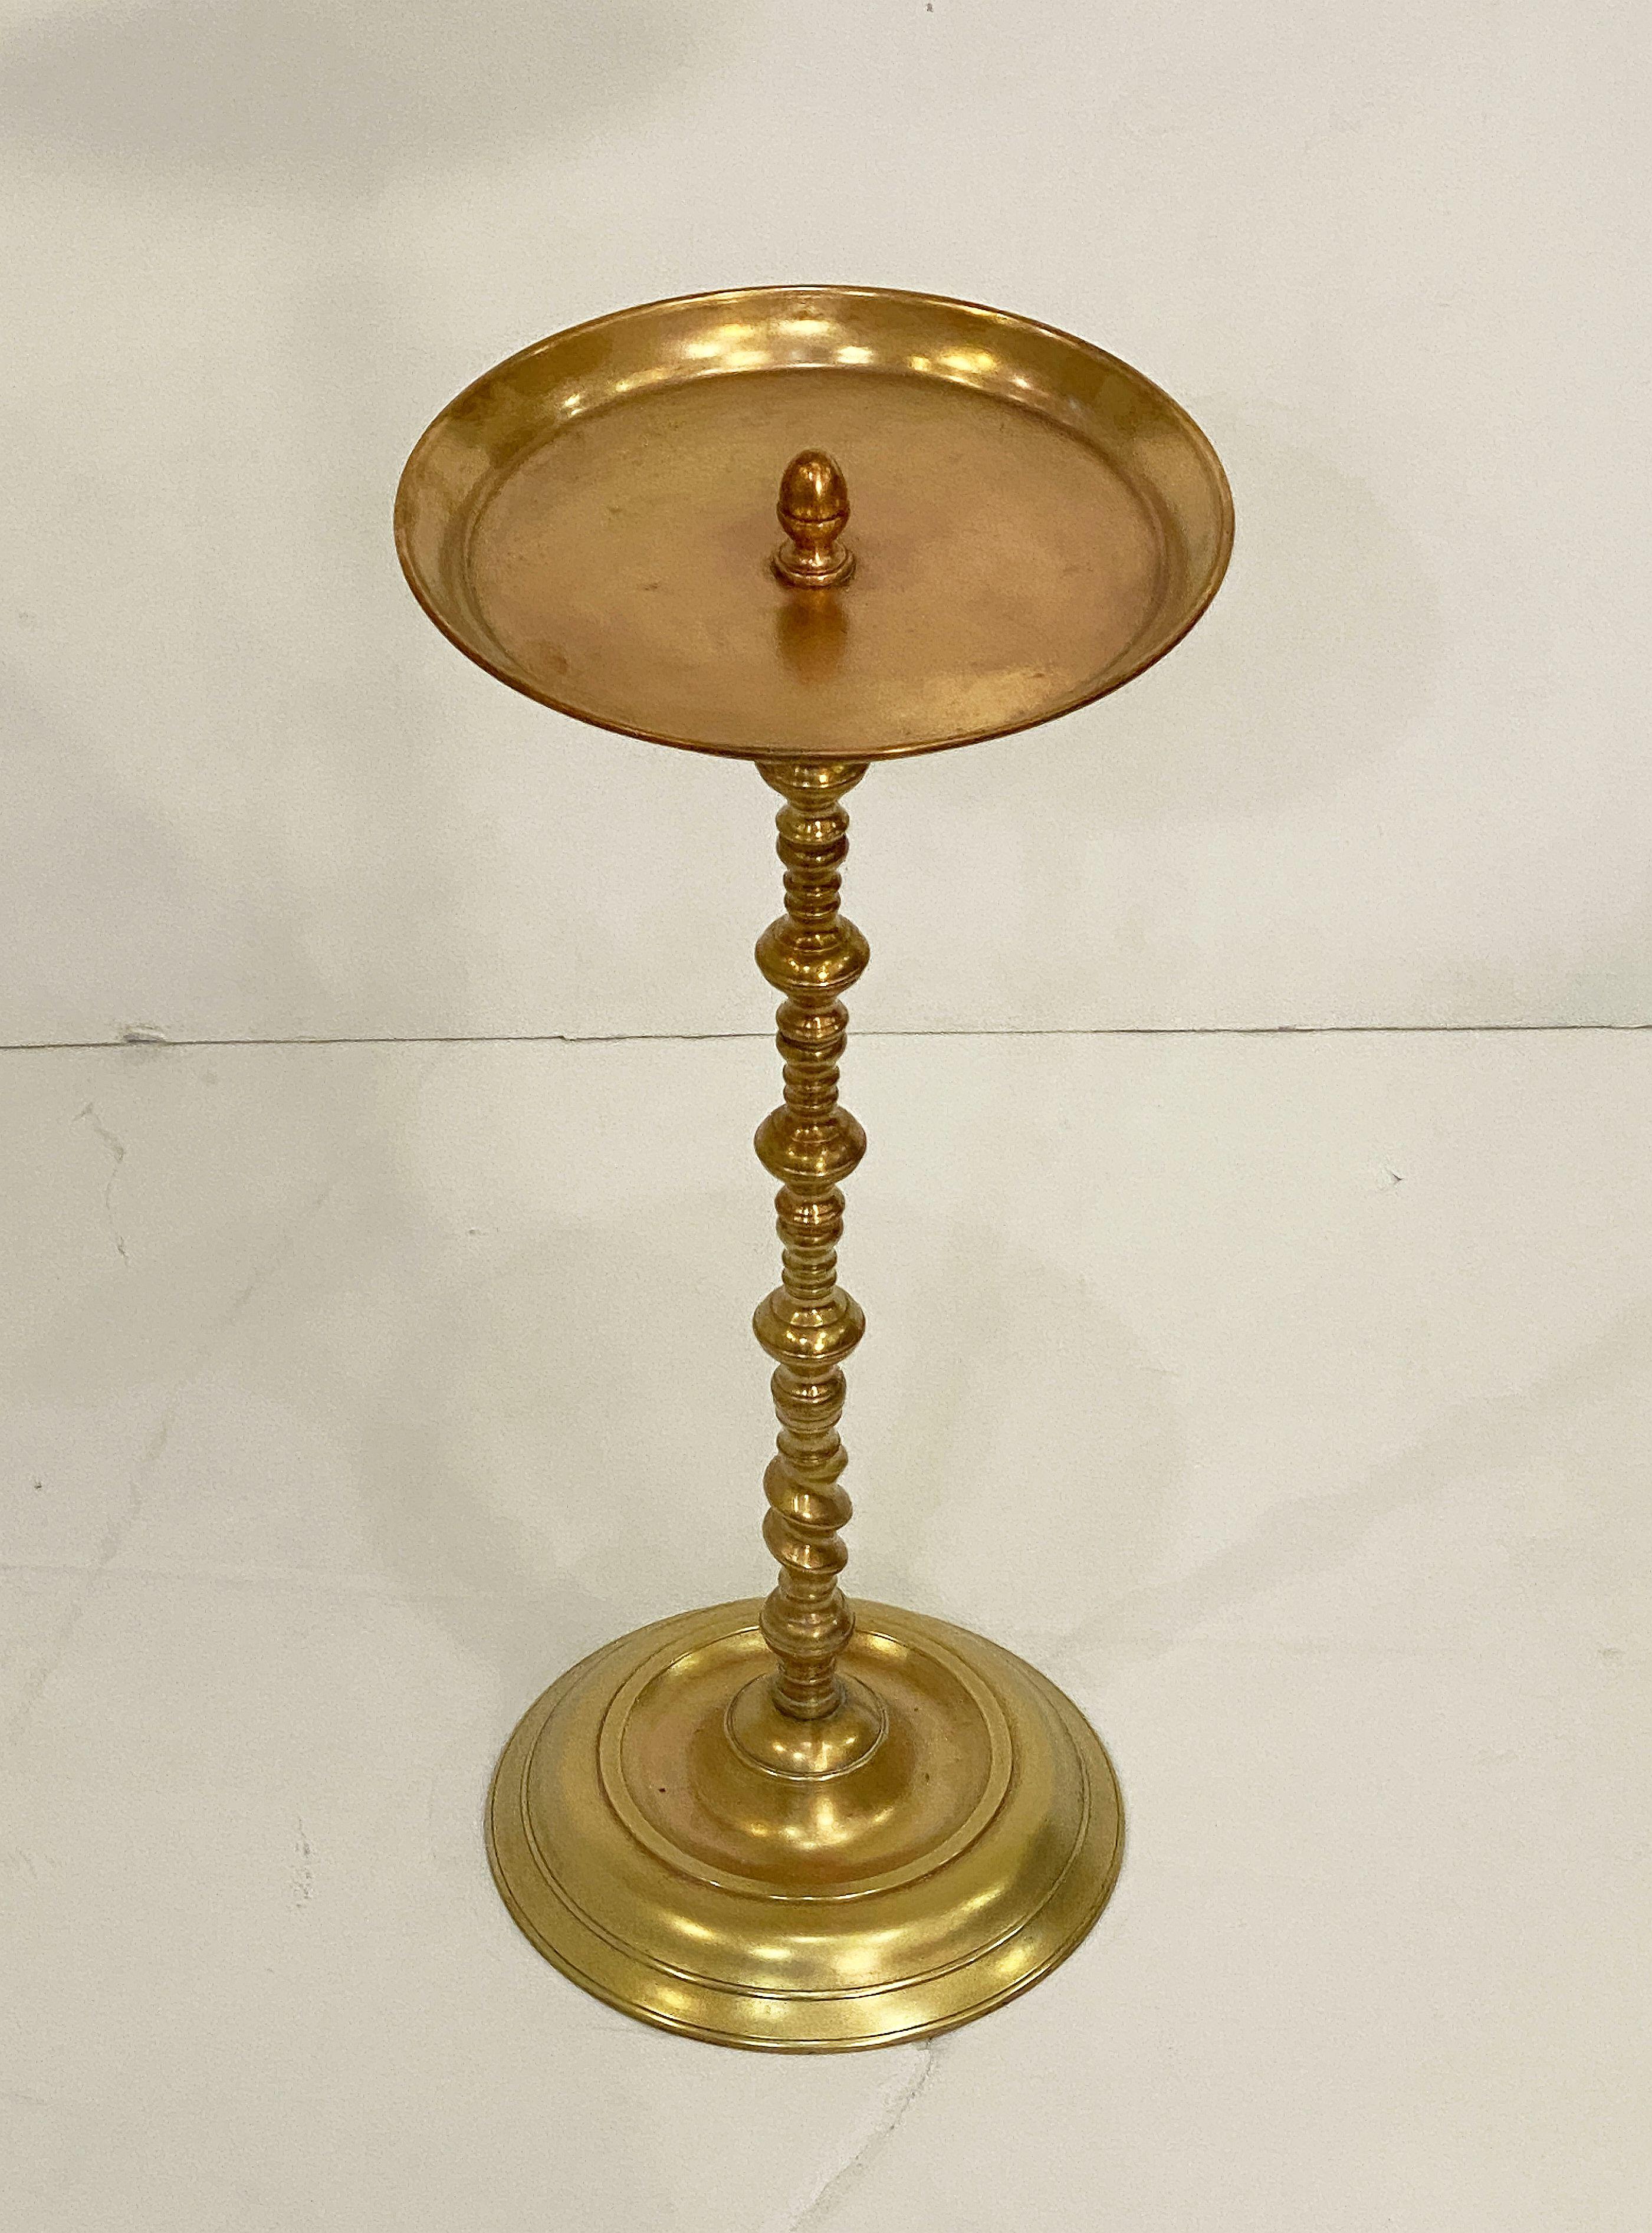 A fine Spanish martini or drinks table of a heavy brass and copper, featuring a round top finial-mounted to a turned brass pedestal column and circular base.

Great as a cocktail table or end table as well.


